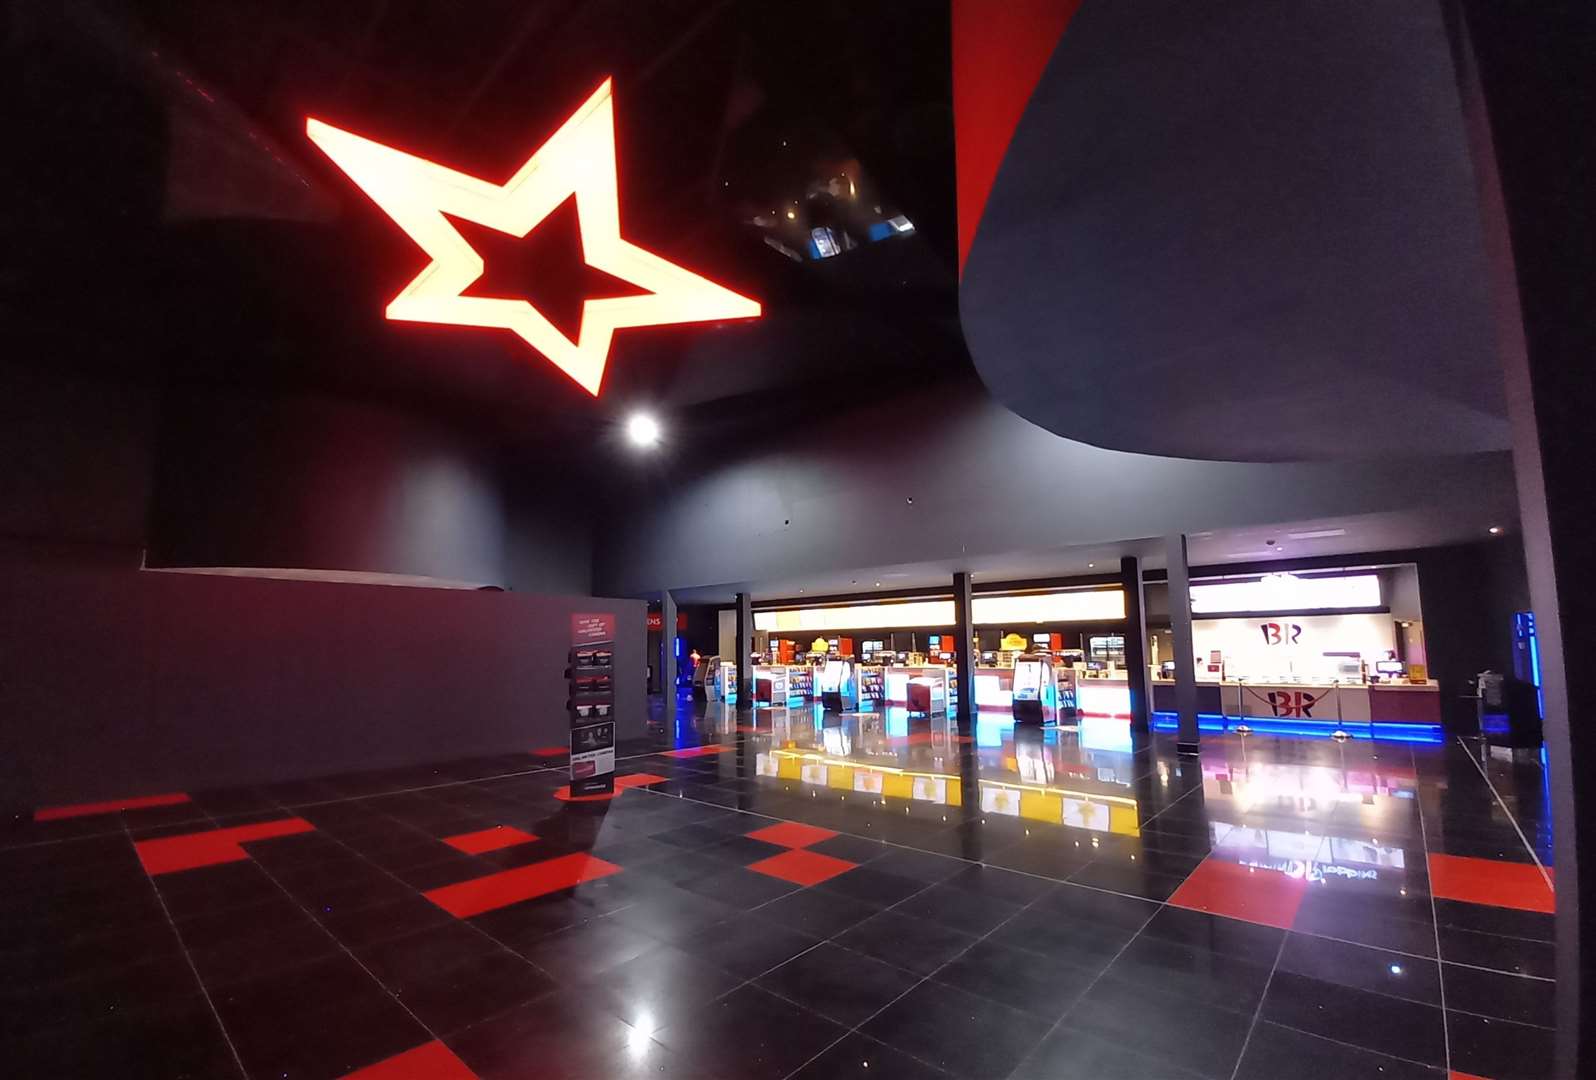 A large Cineworld logo has replaced the mirrored ceiling